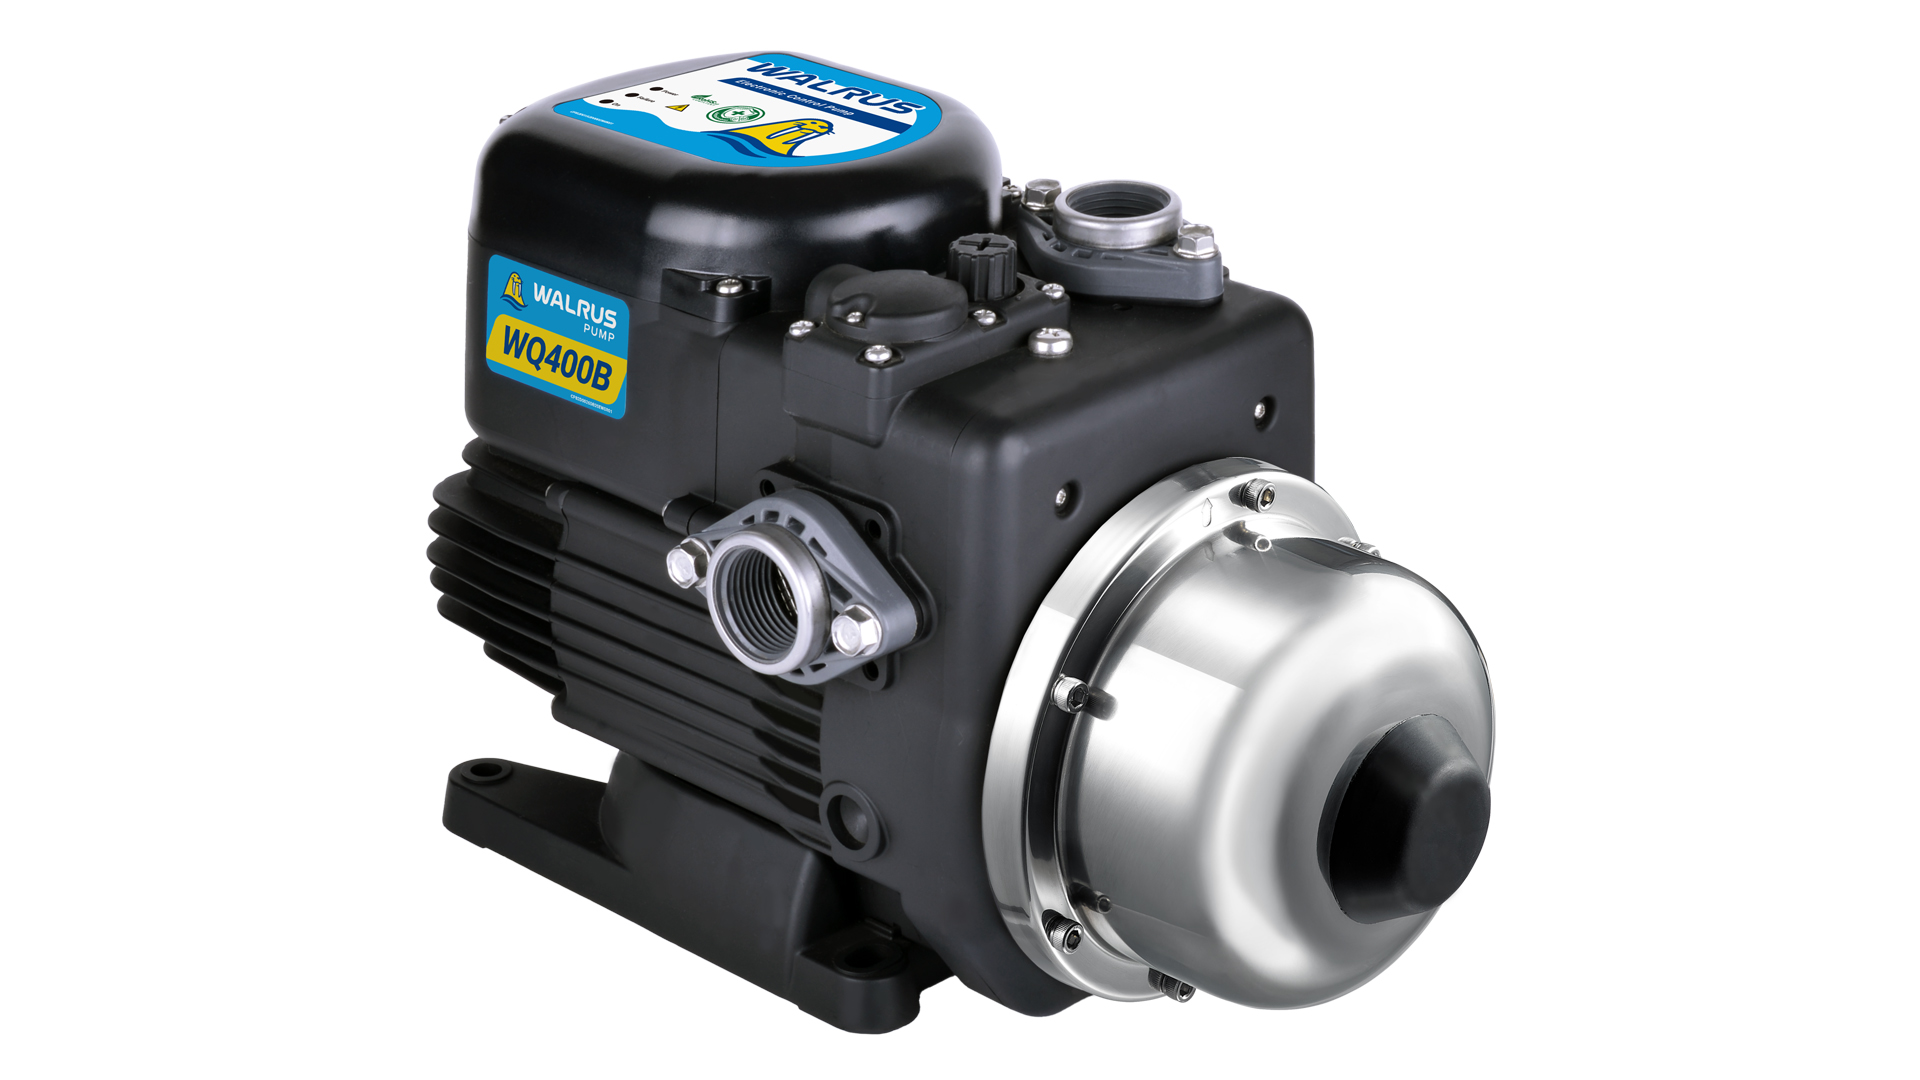 WQ_B Series Water-Cooled Ultra Quiet Electronic Control Pump